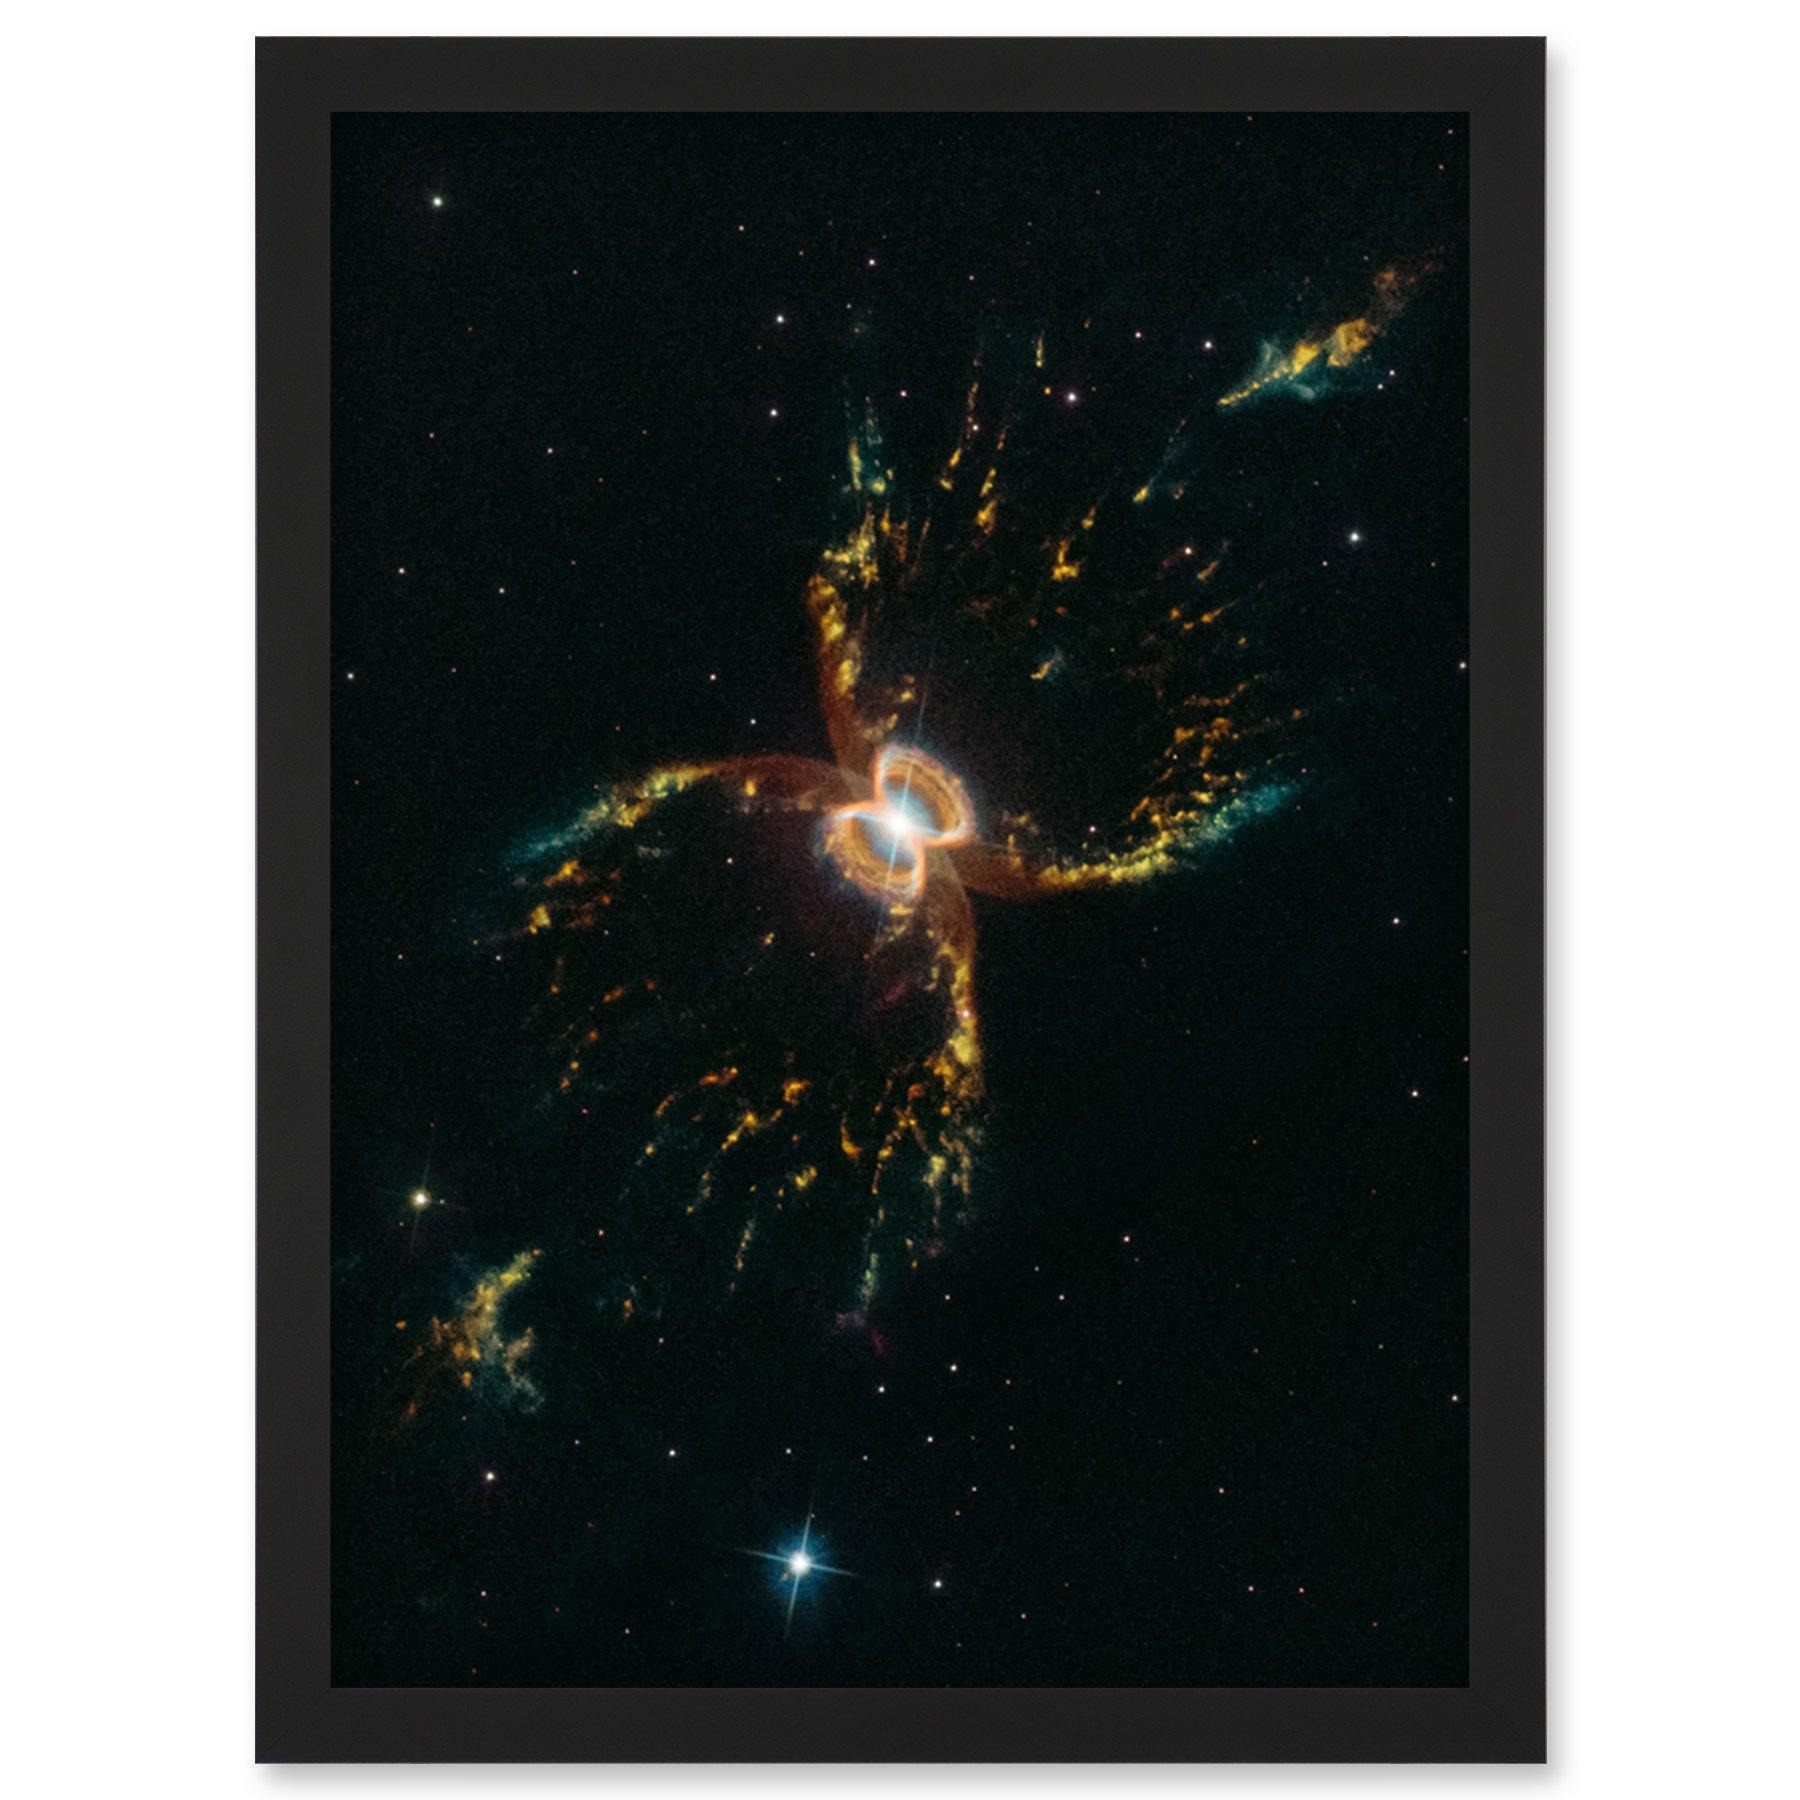 Hubble Space Telescope Image Southern Crab Nebula Hen 2-104 Red Yellow Blue Hourglass Celestial Object Red Giant Star White Dwarf Flat Disk Of Gas Art Print Framed Poster Wall Decor - image 1